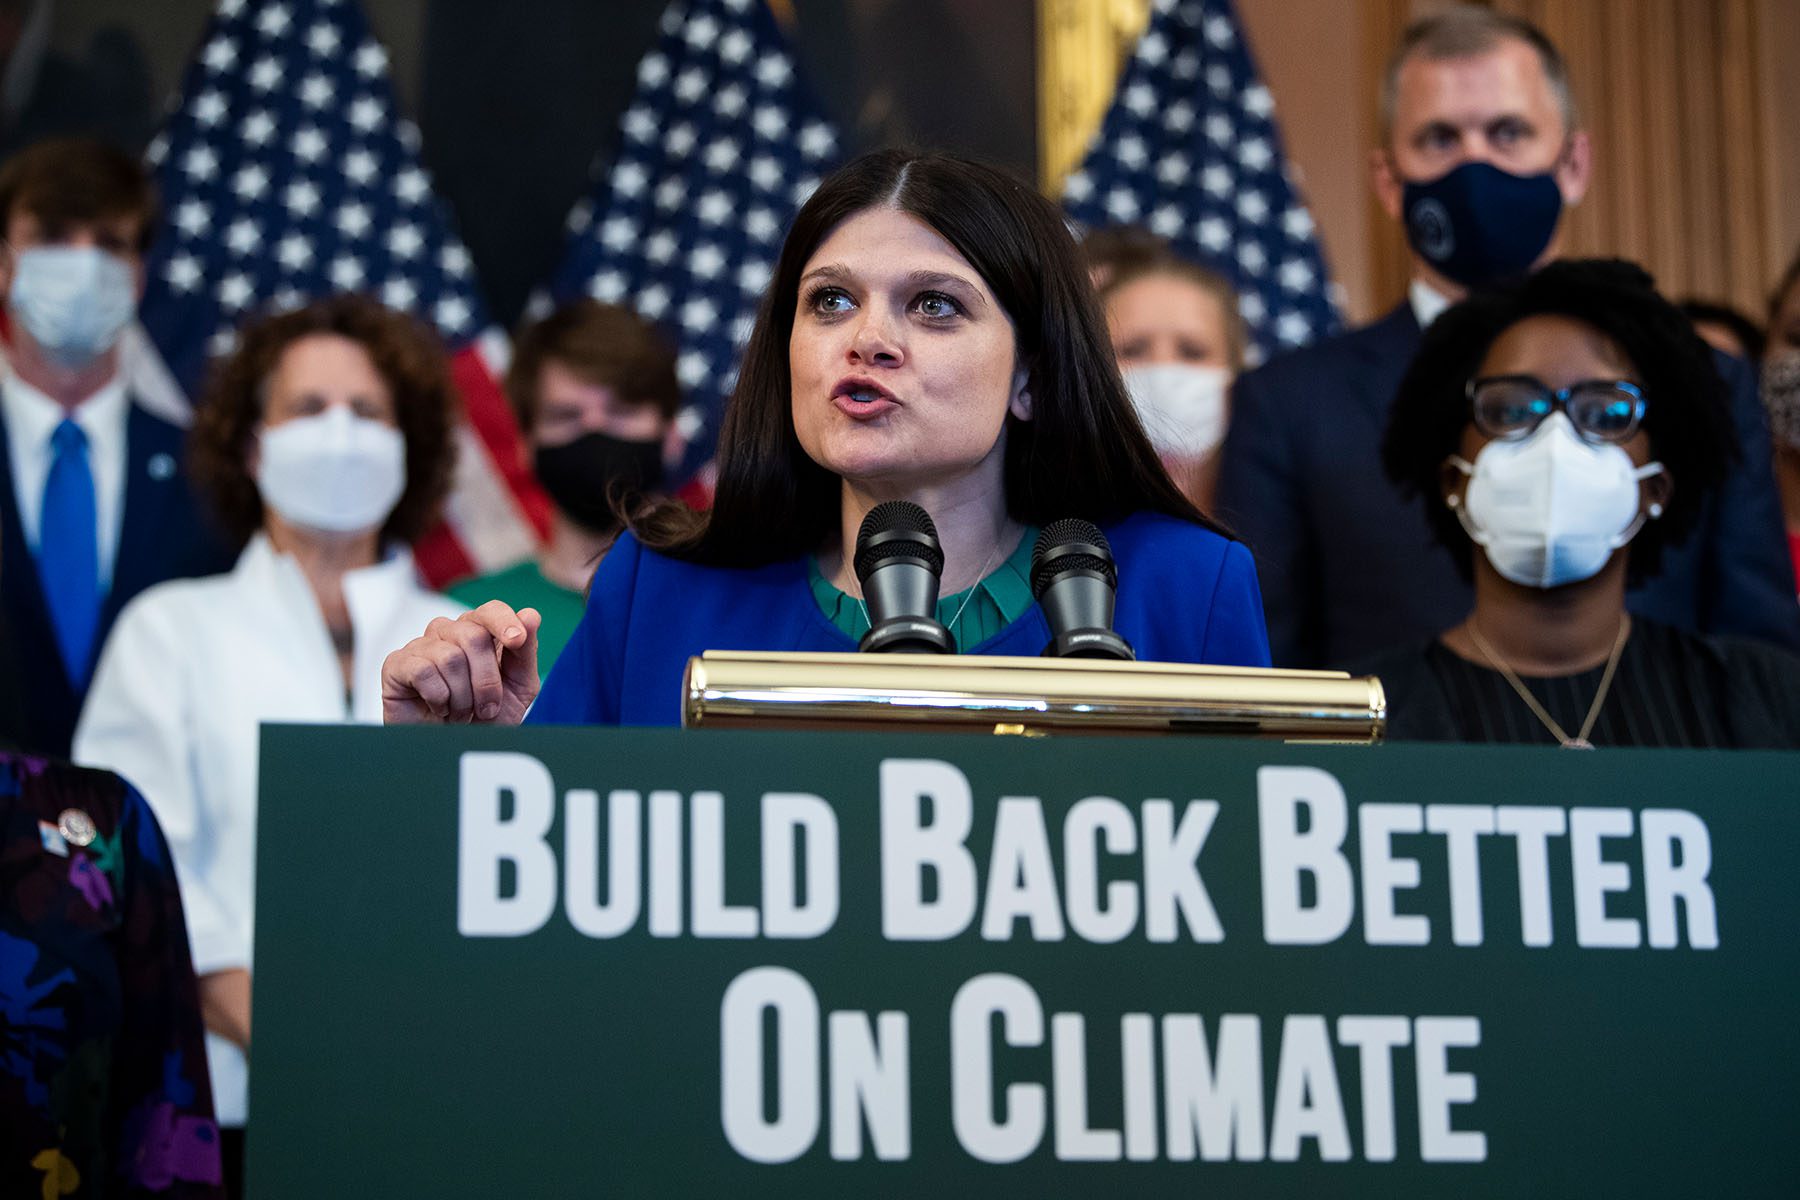 Haley Stevens speaks at a podium as she conducts a rally to promote climate benefits in the Build Back Better Act in the U.S. Capitol.